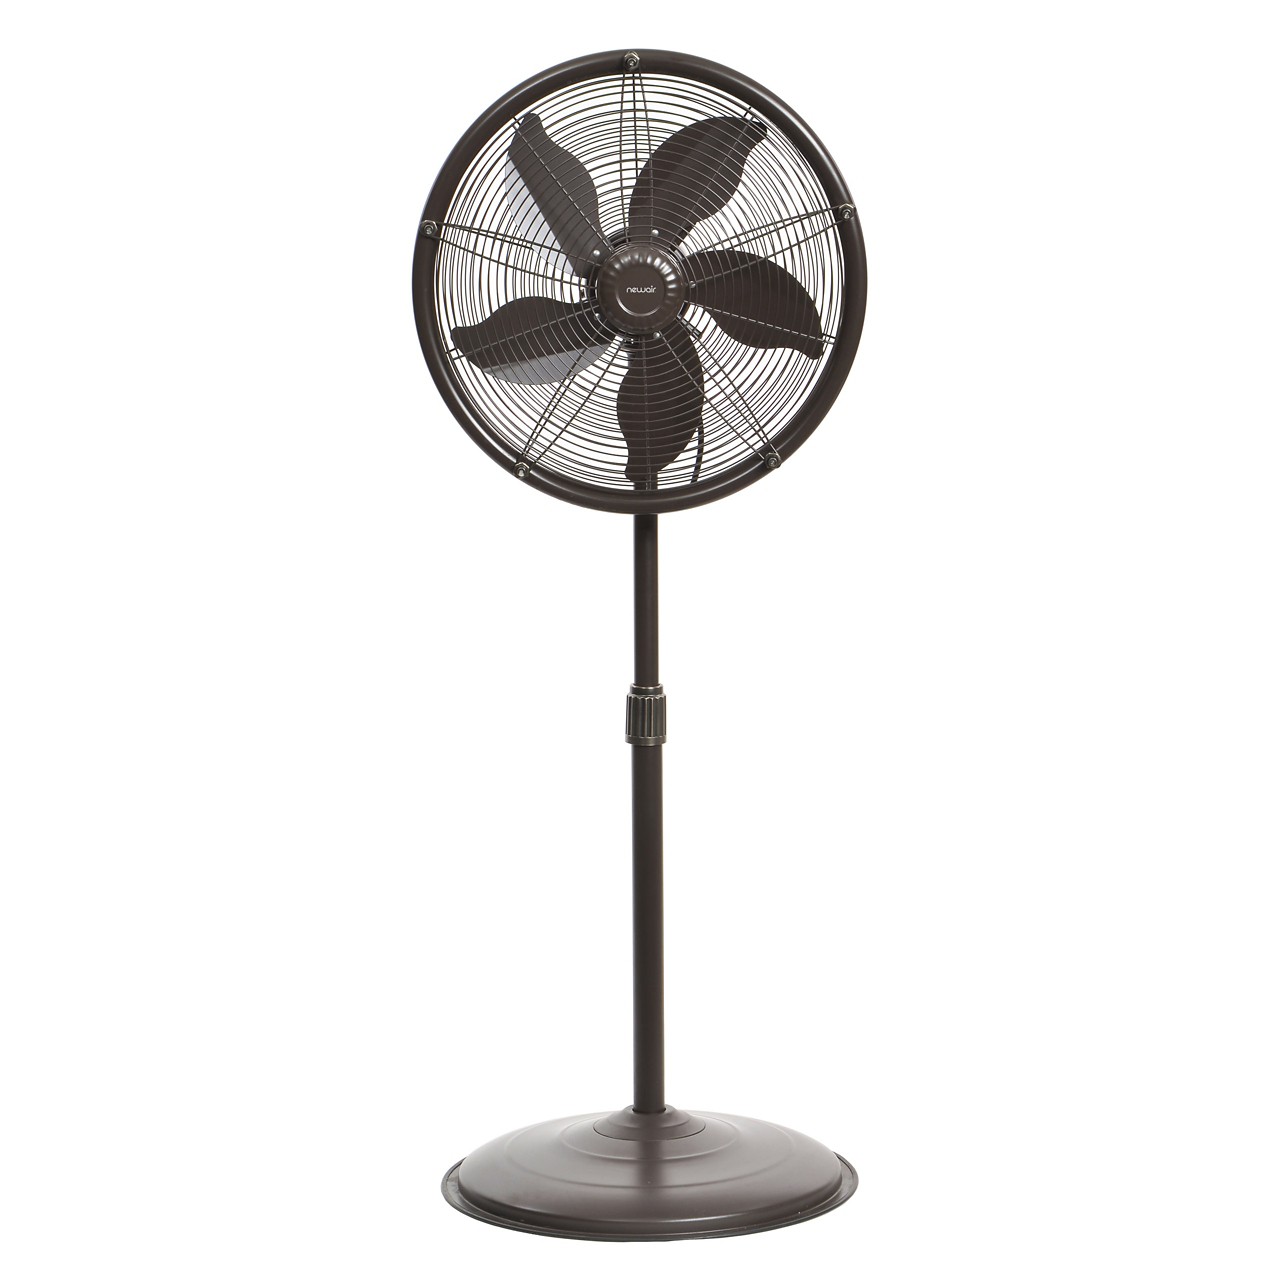 Image of a misting fan that links to all misting fan catalog.